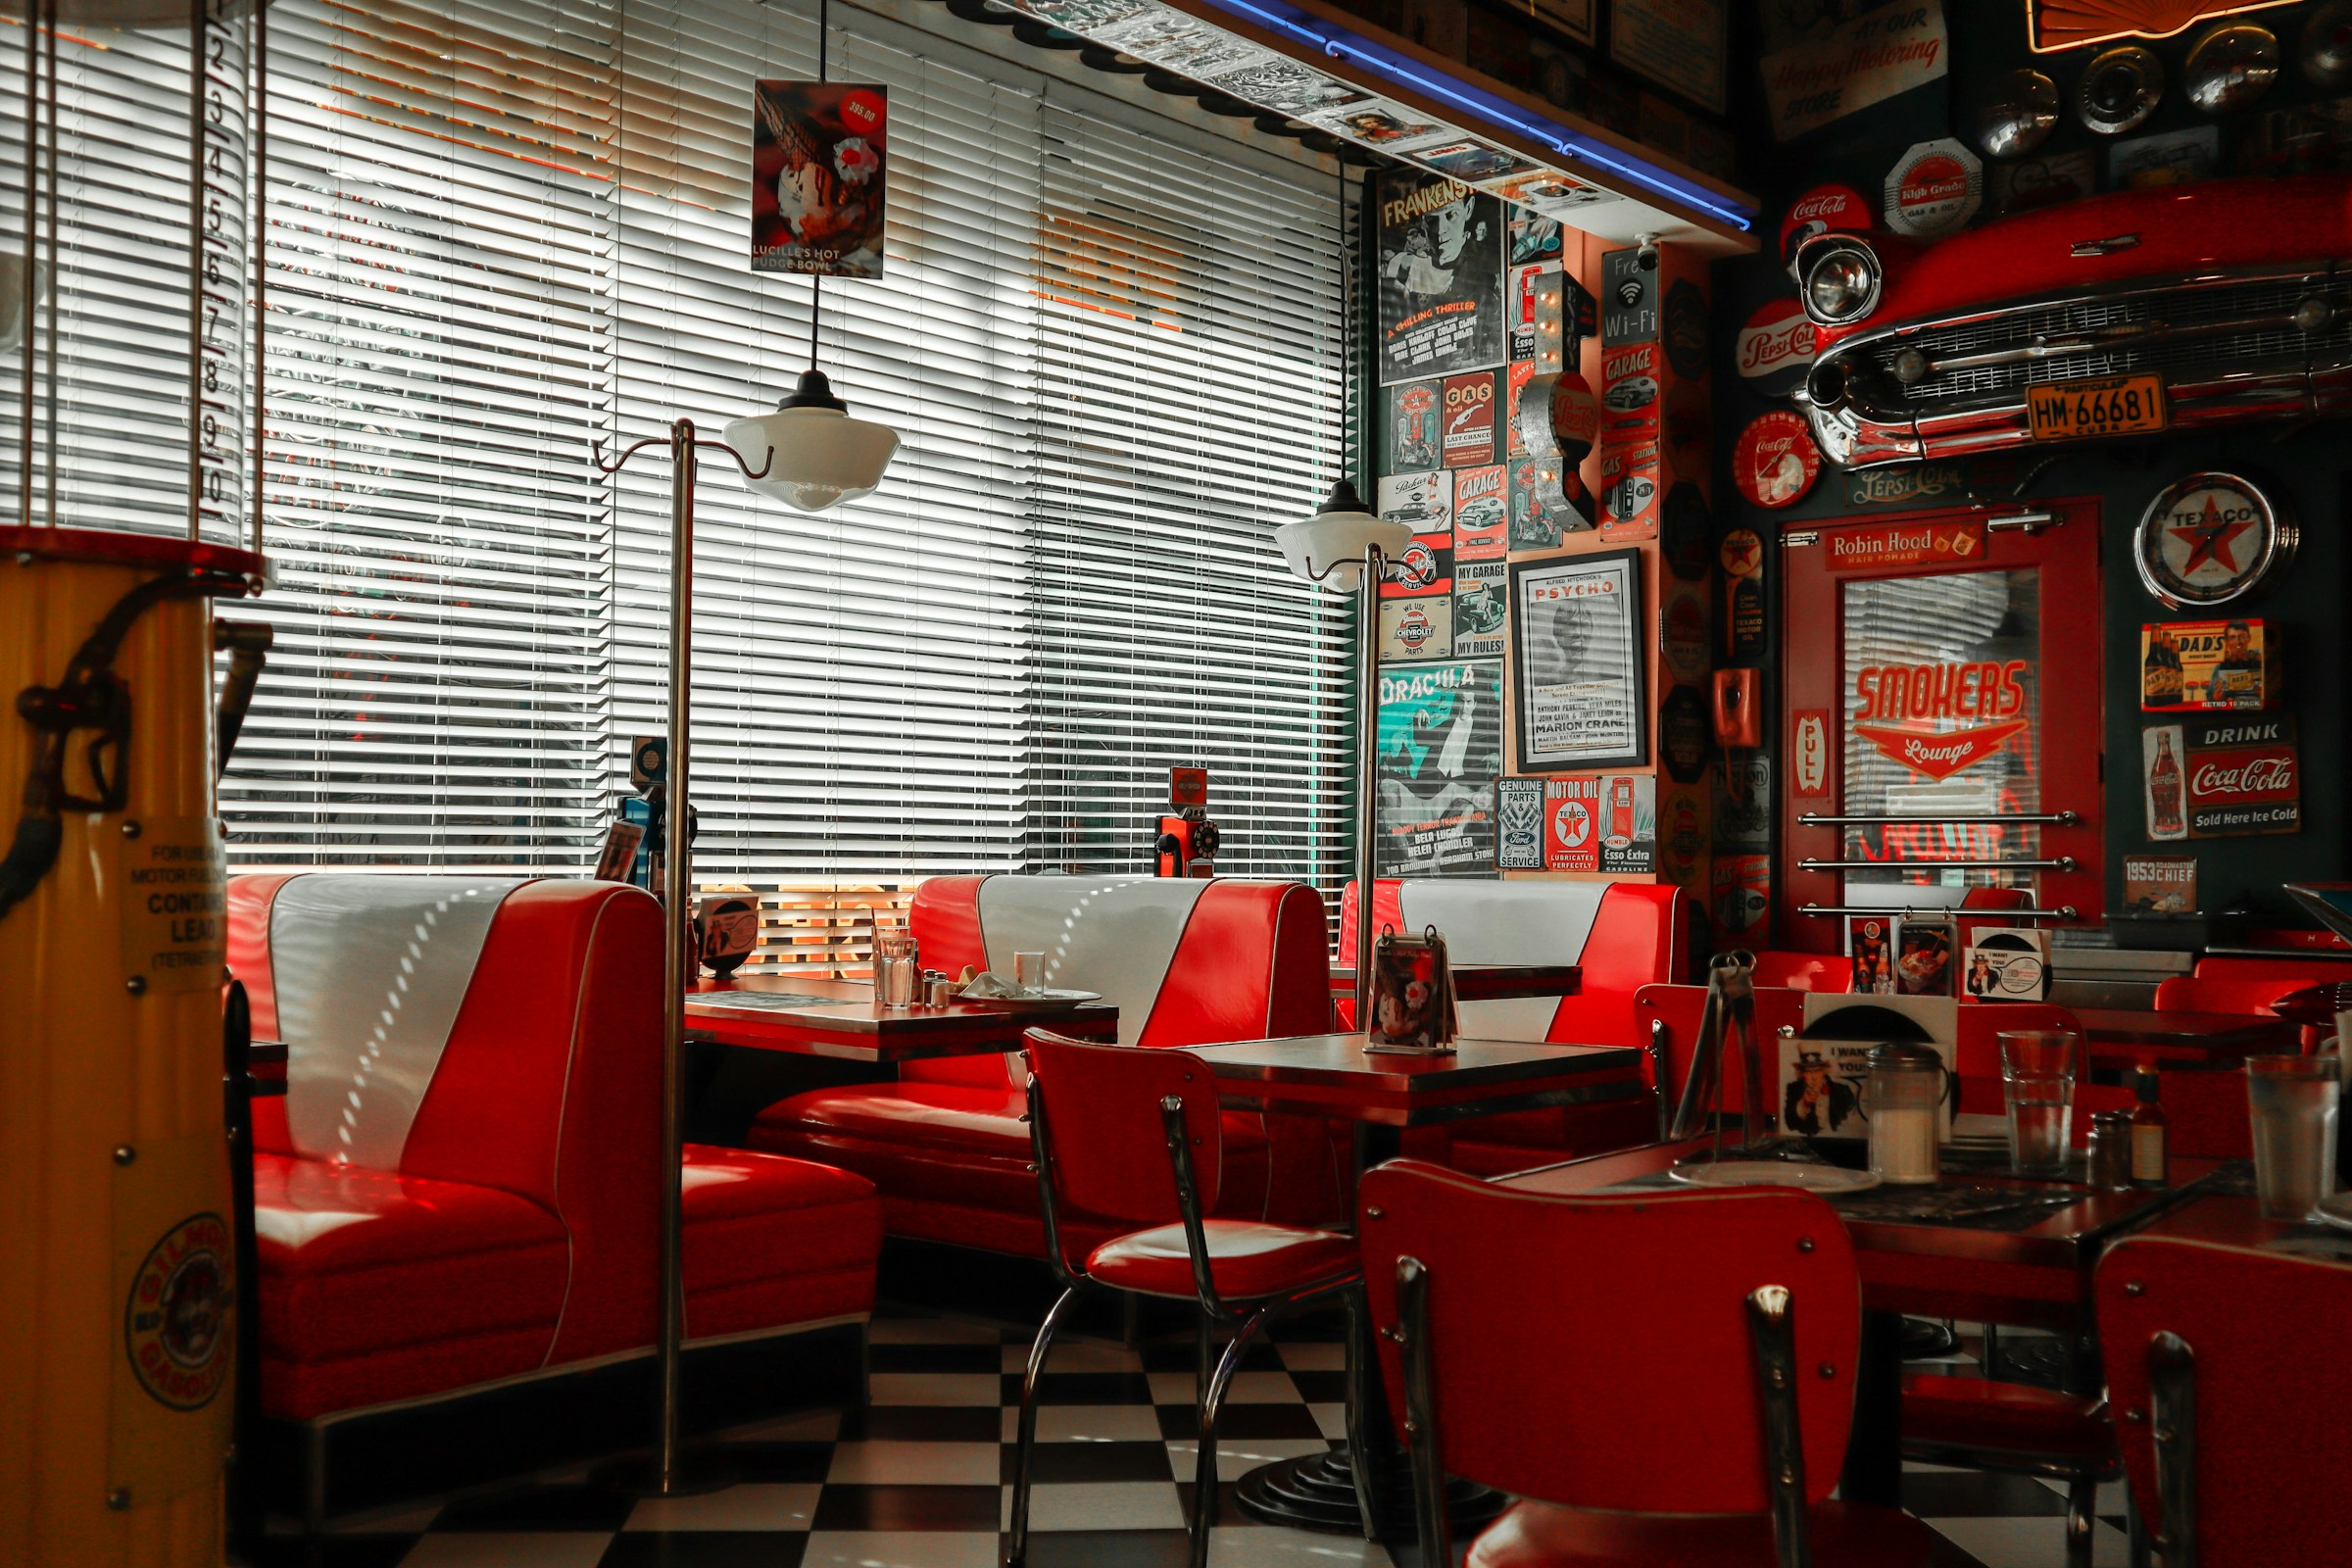 A few booths in a diner | Source: Unsplash